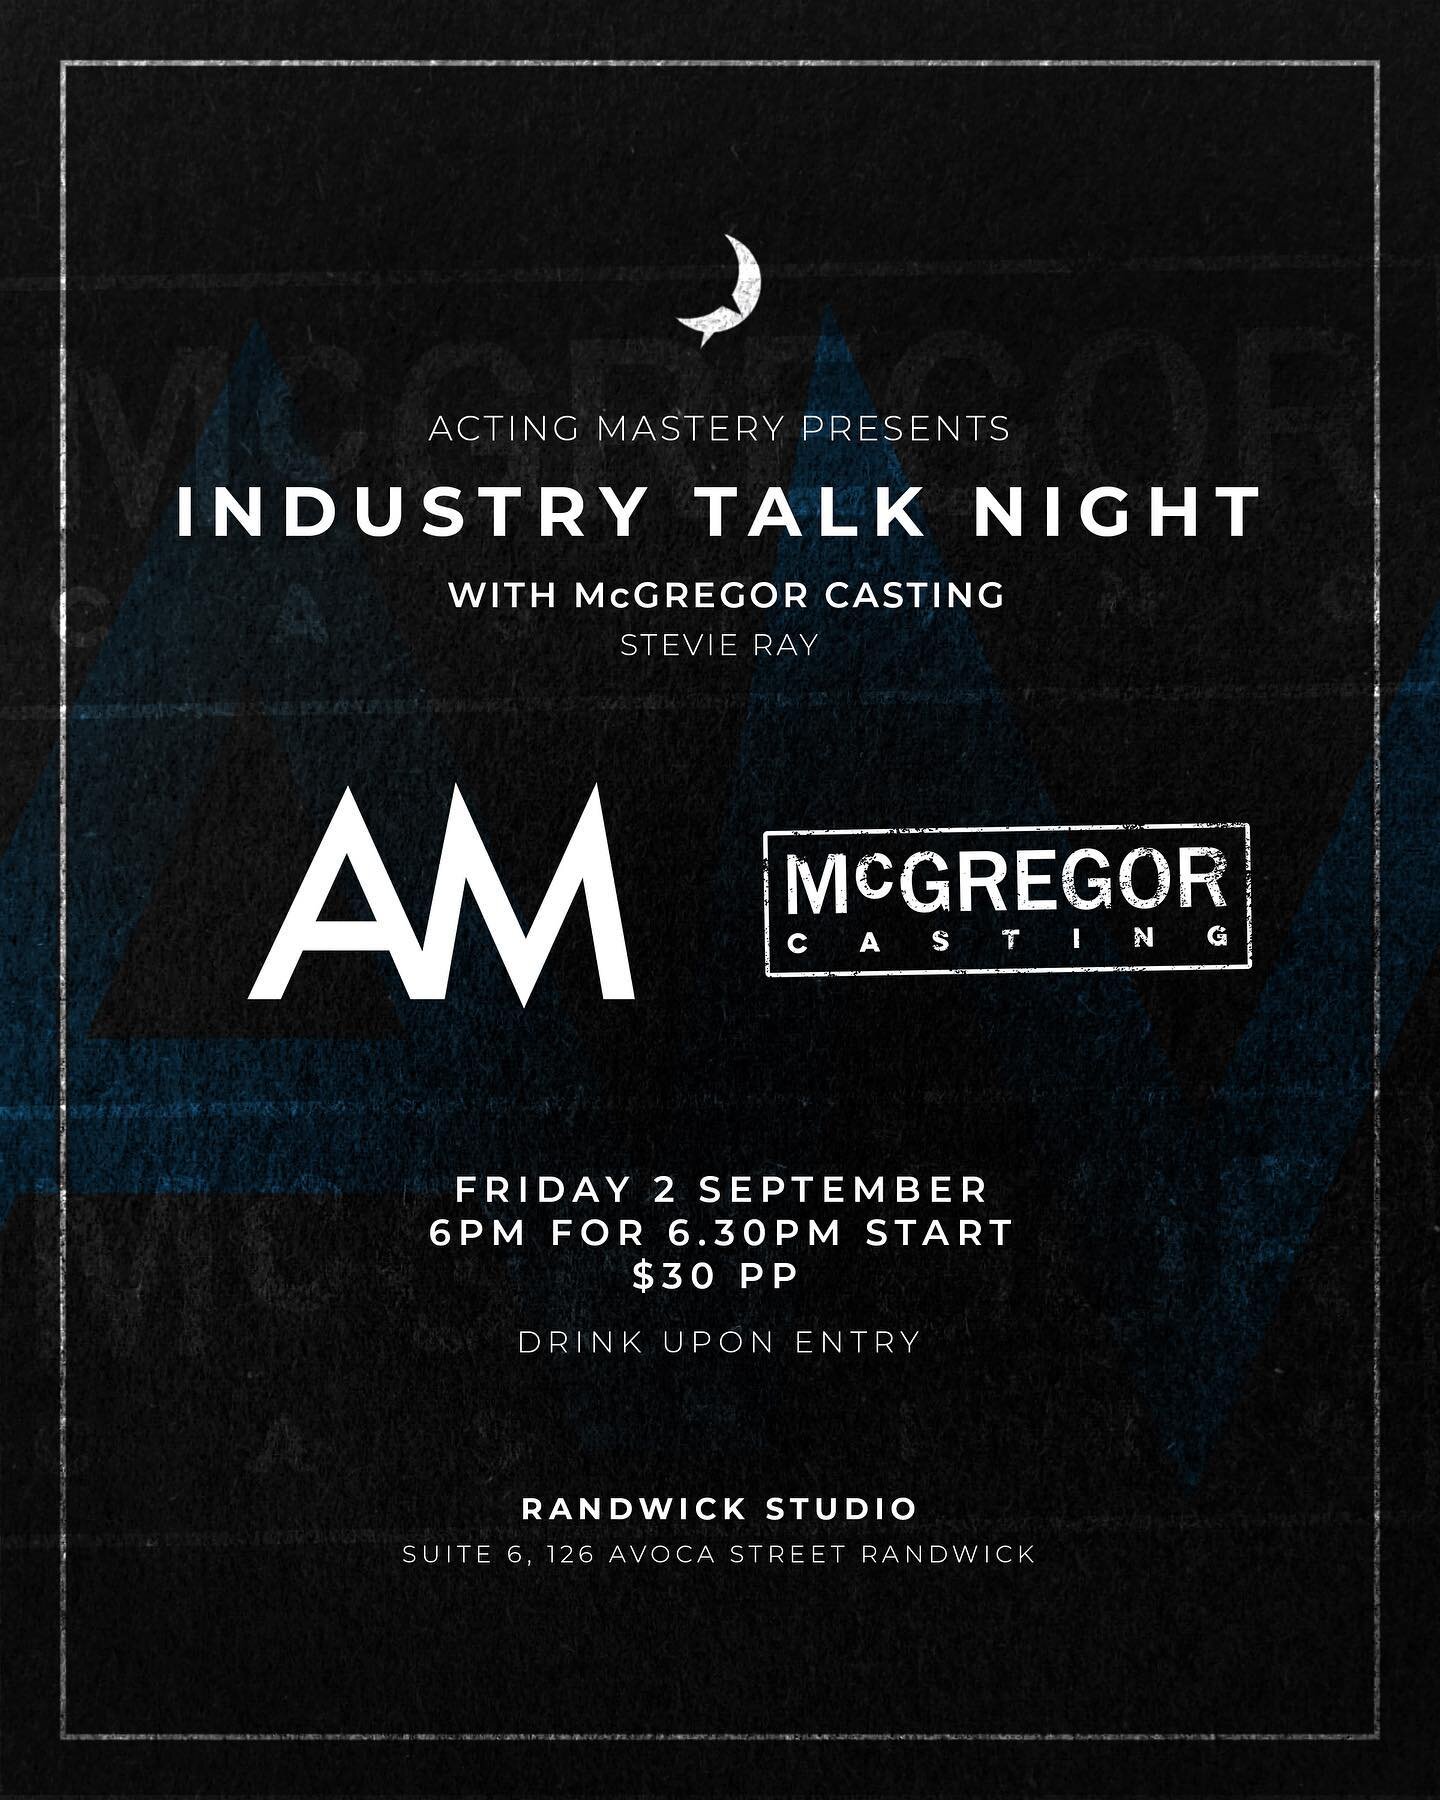 4 tickets have just opened up for our Industry Talk Night with Stevie Ray from McGregor Casting, Friday, 2nd September. 

We will be delighted to hear insights from their Senior Casting Director, Stevie Ray on the casting process, self- taping, insig